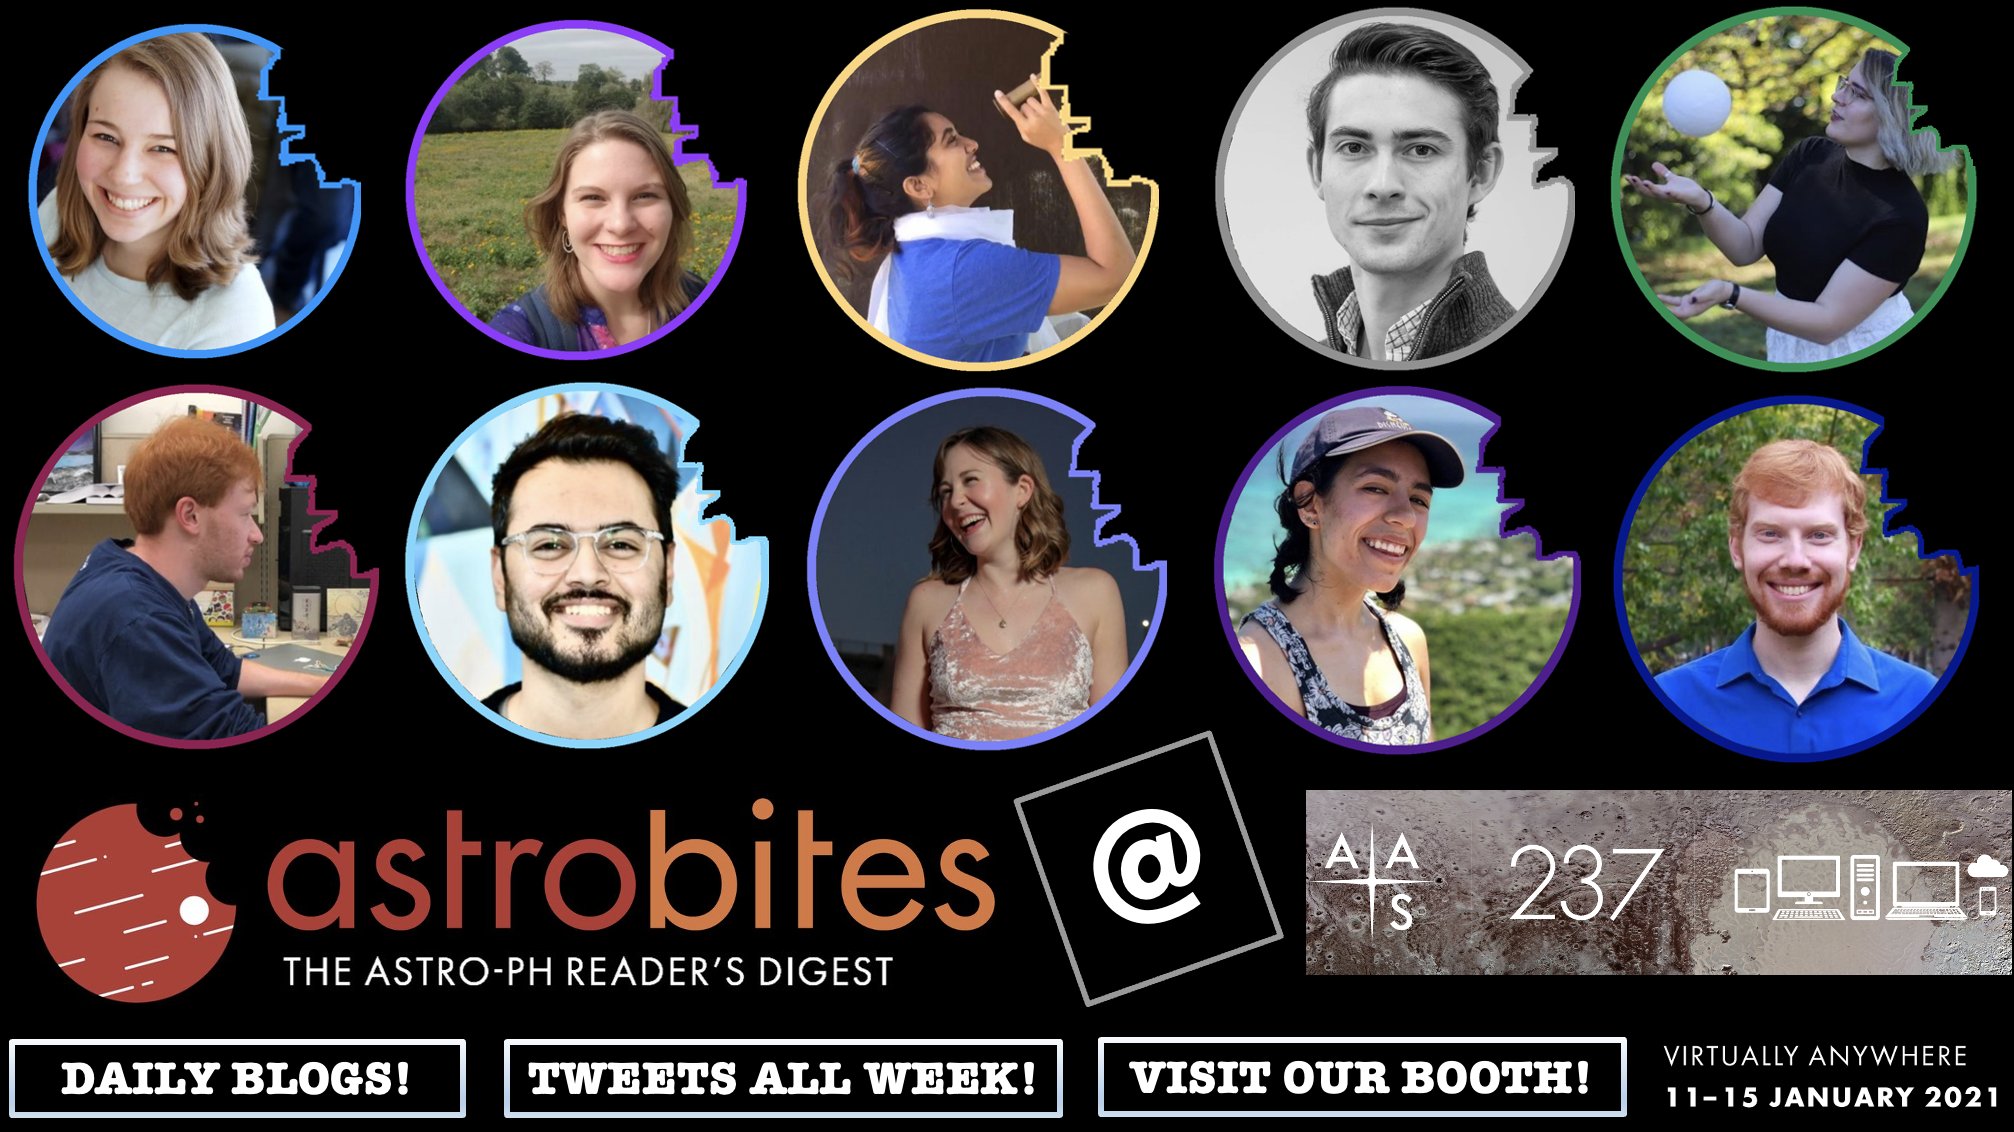 Poster illustration featuring seven photos of people and the astrobites and AAS236 logos.